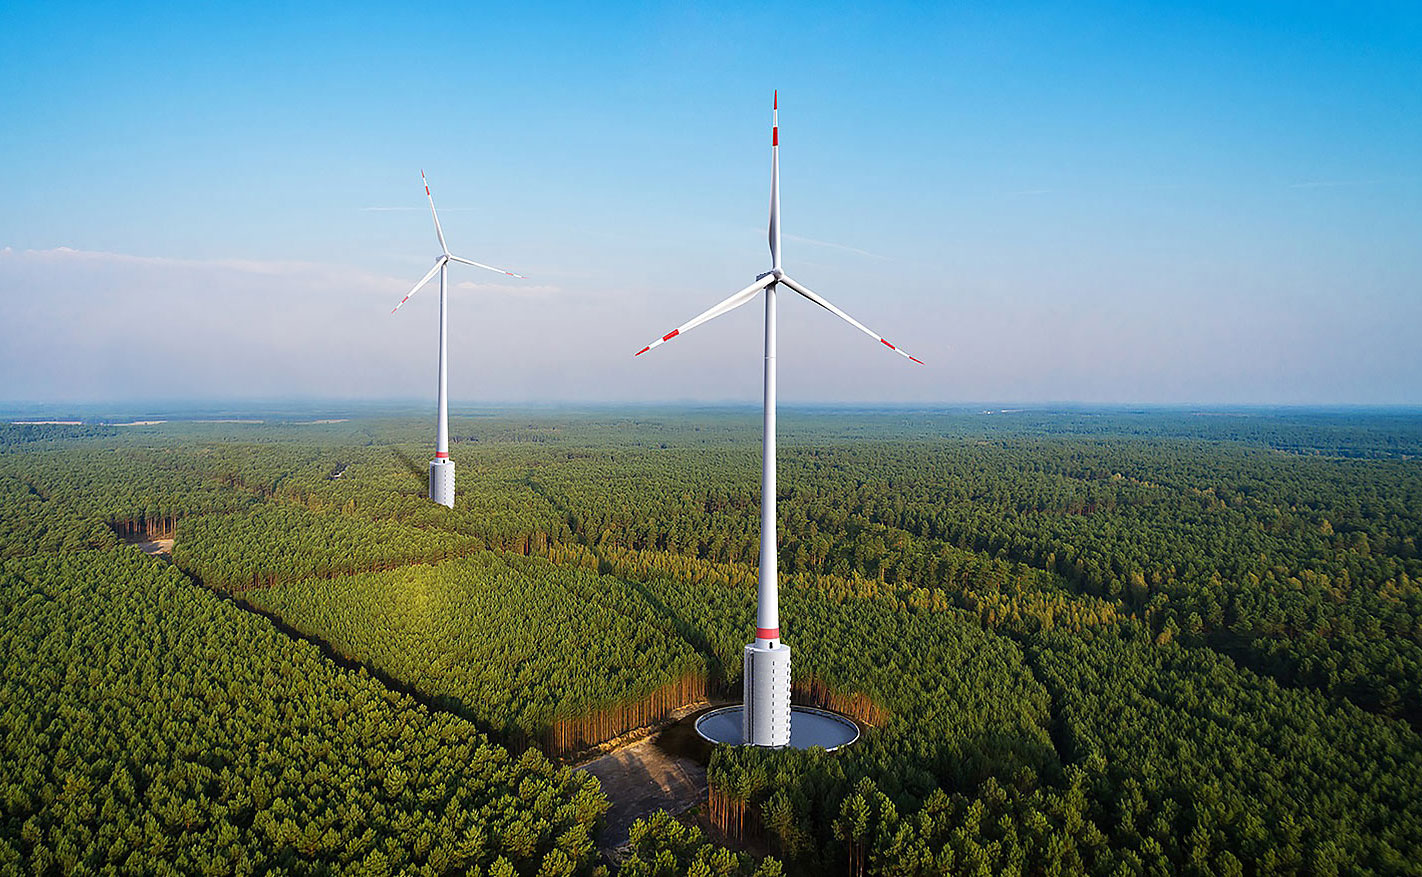 I. Introduction to Bladeless Wind Turbines